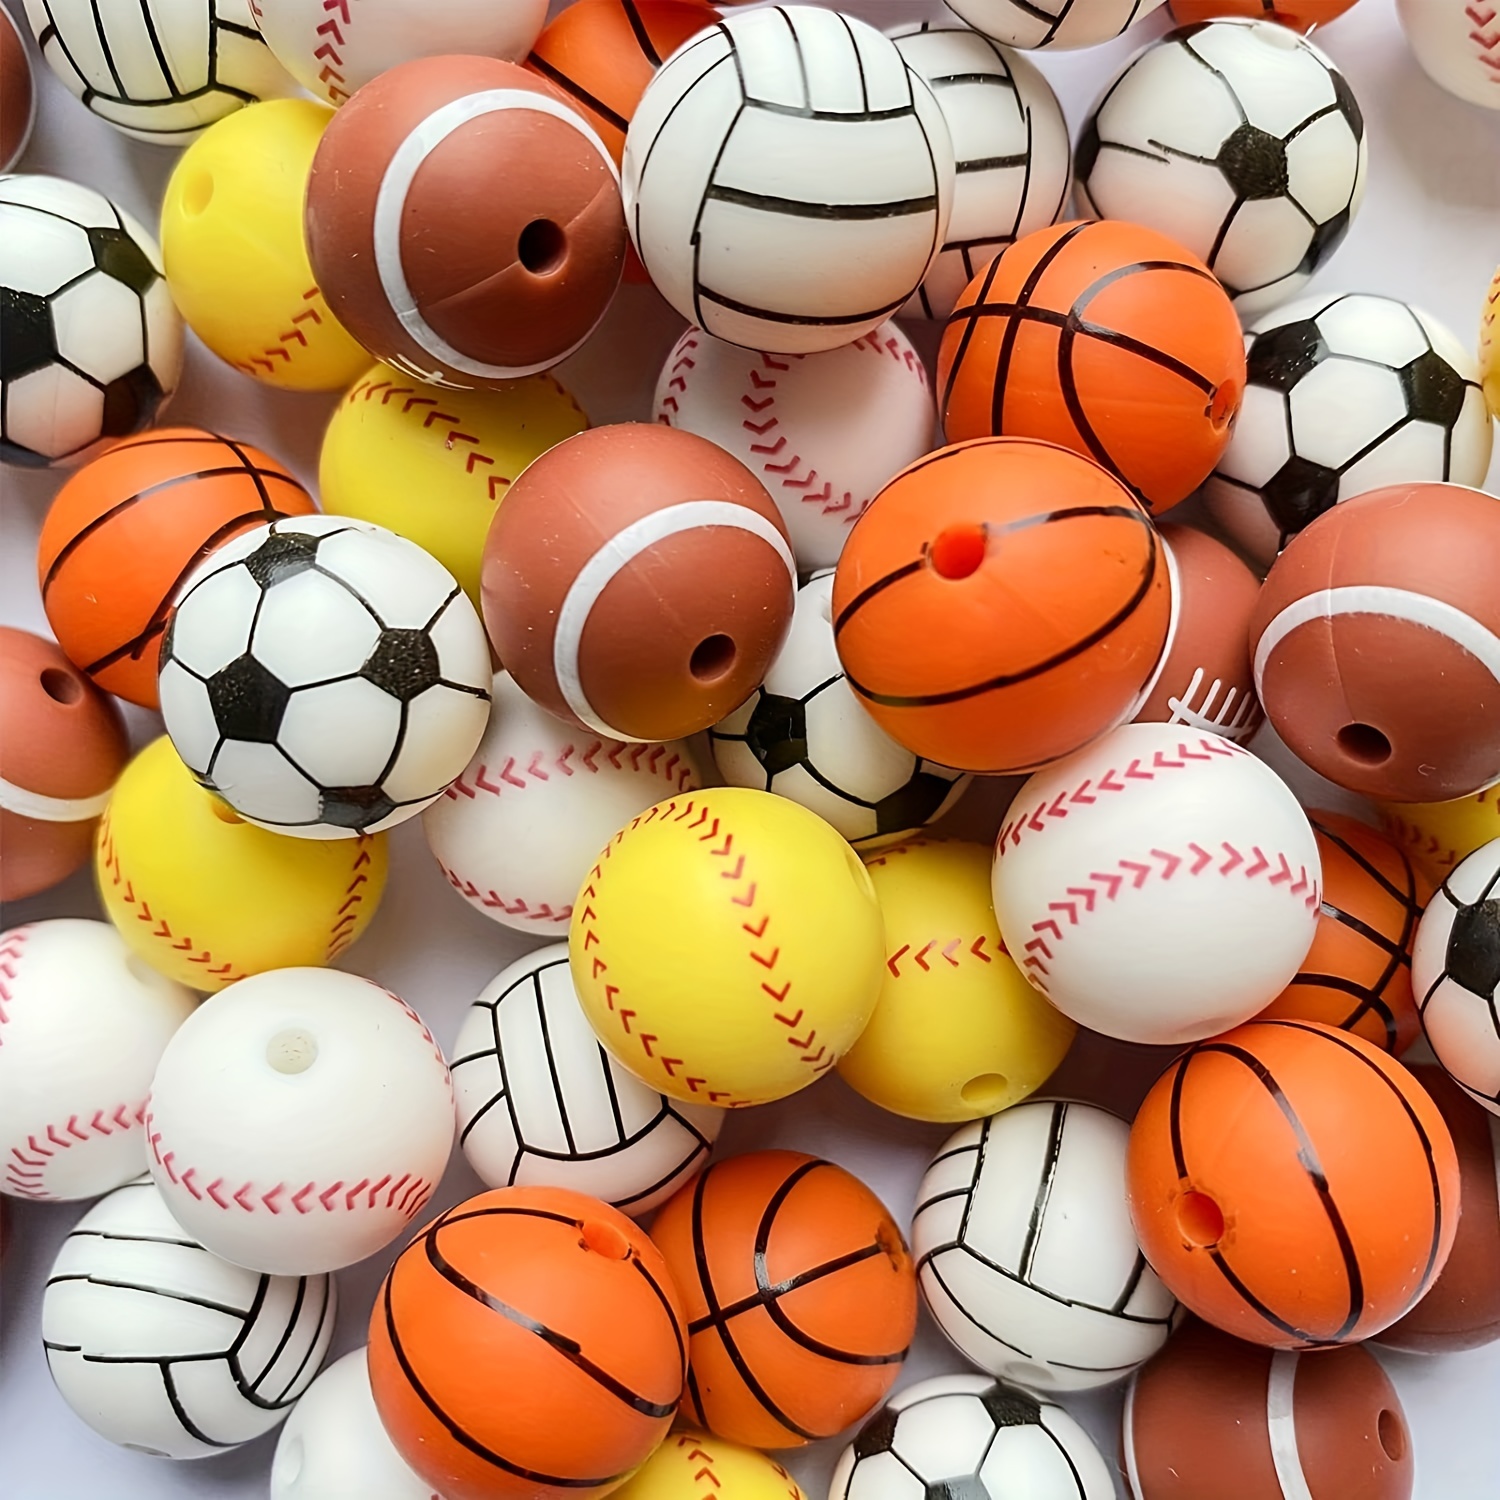 200 Pcs Baseball Beads 12mm Sports Beads Acrylic Beads for Jewelry Making  Necklace Bracelet Craft Decoration Accessories